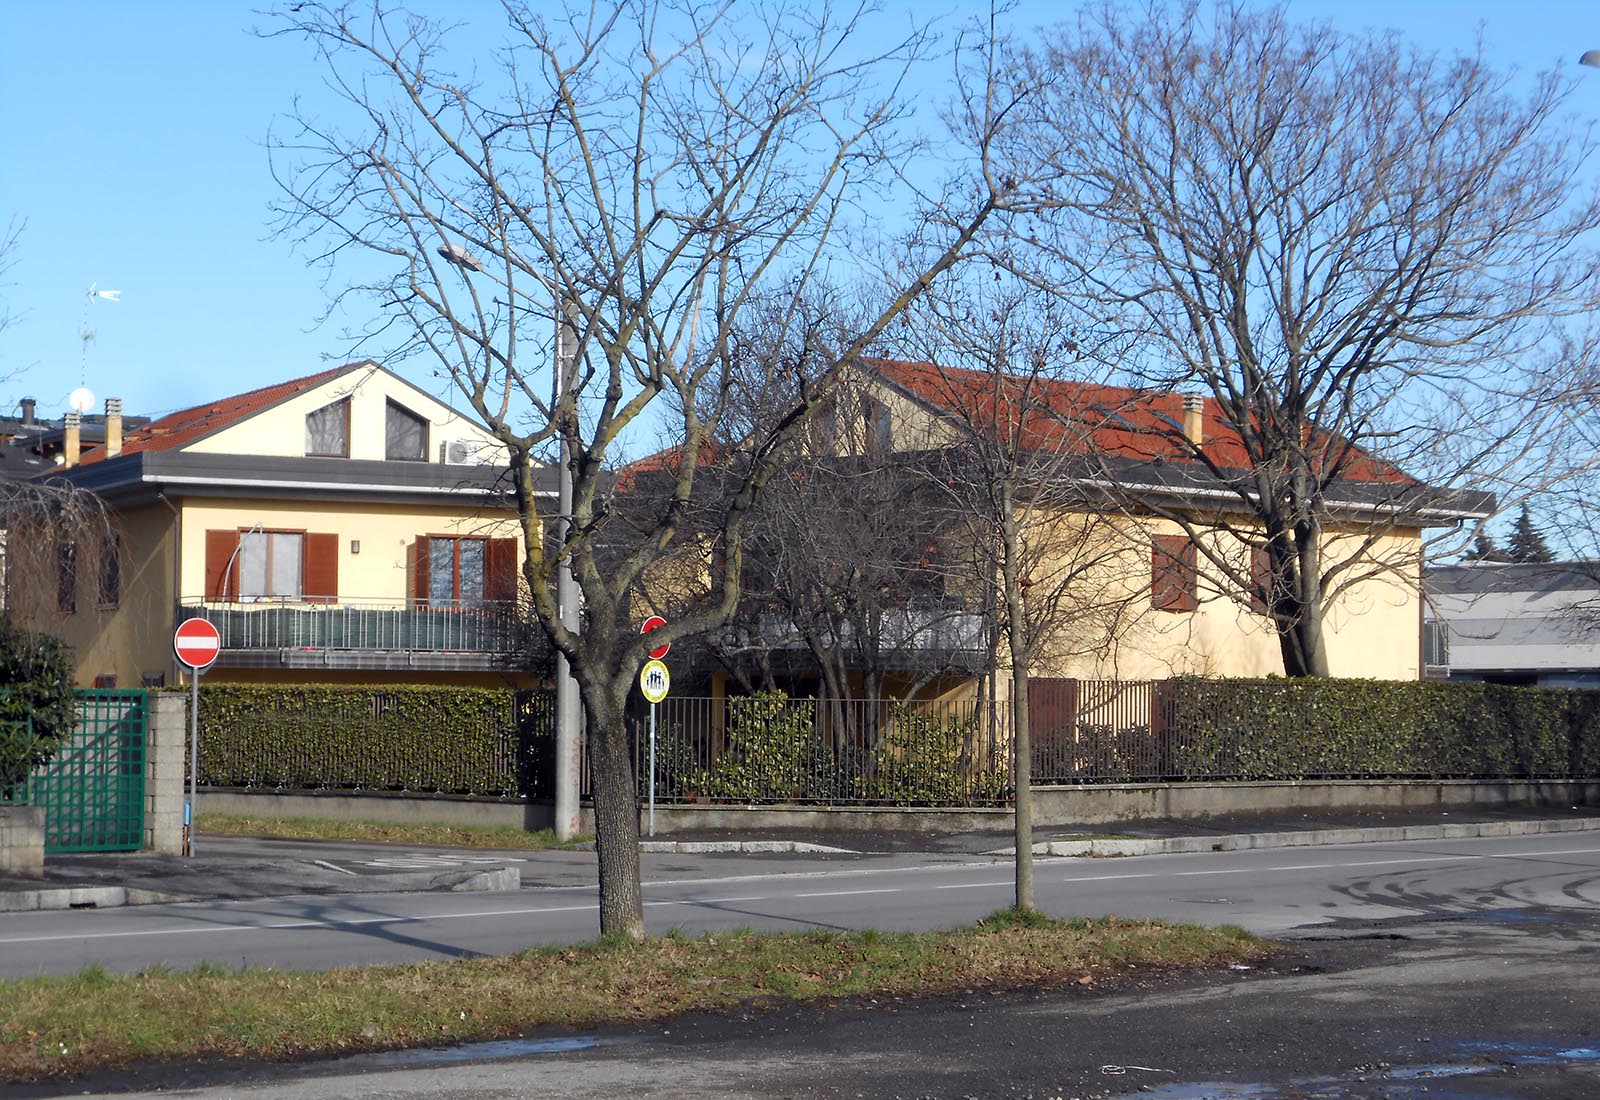 Residential building in Nerviano - View